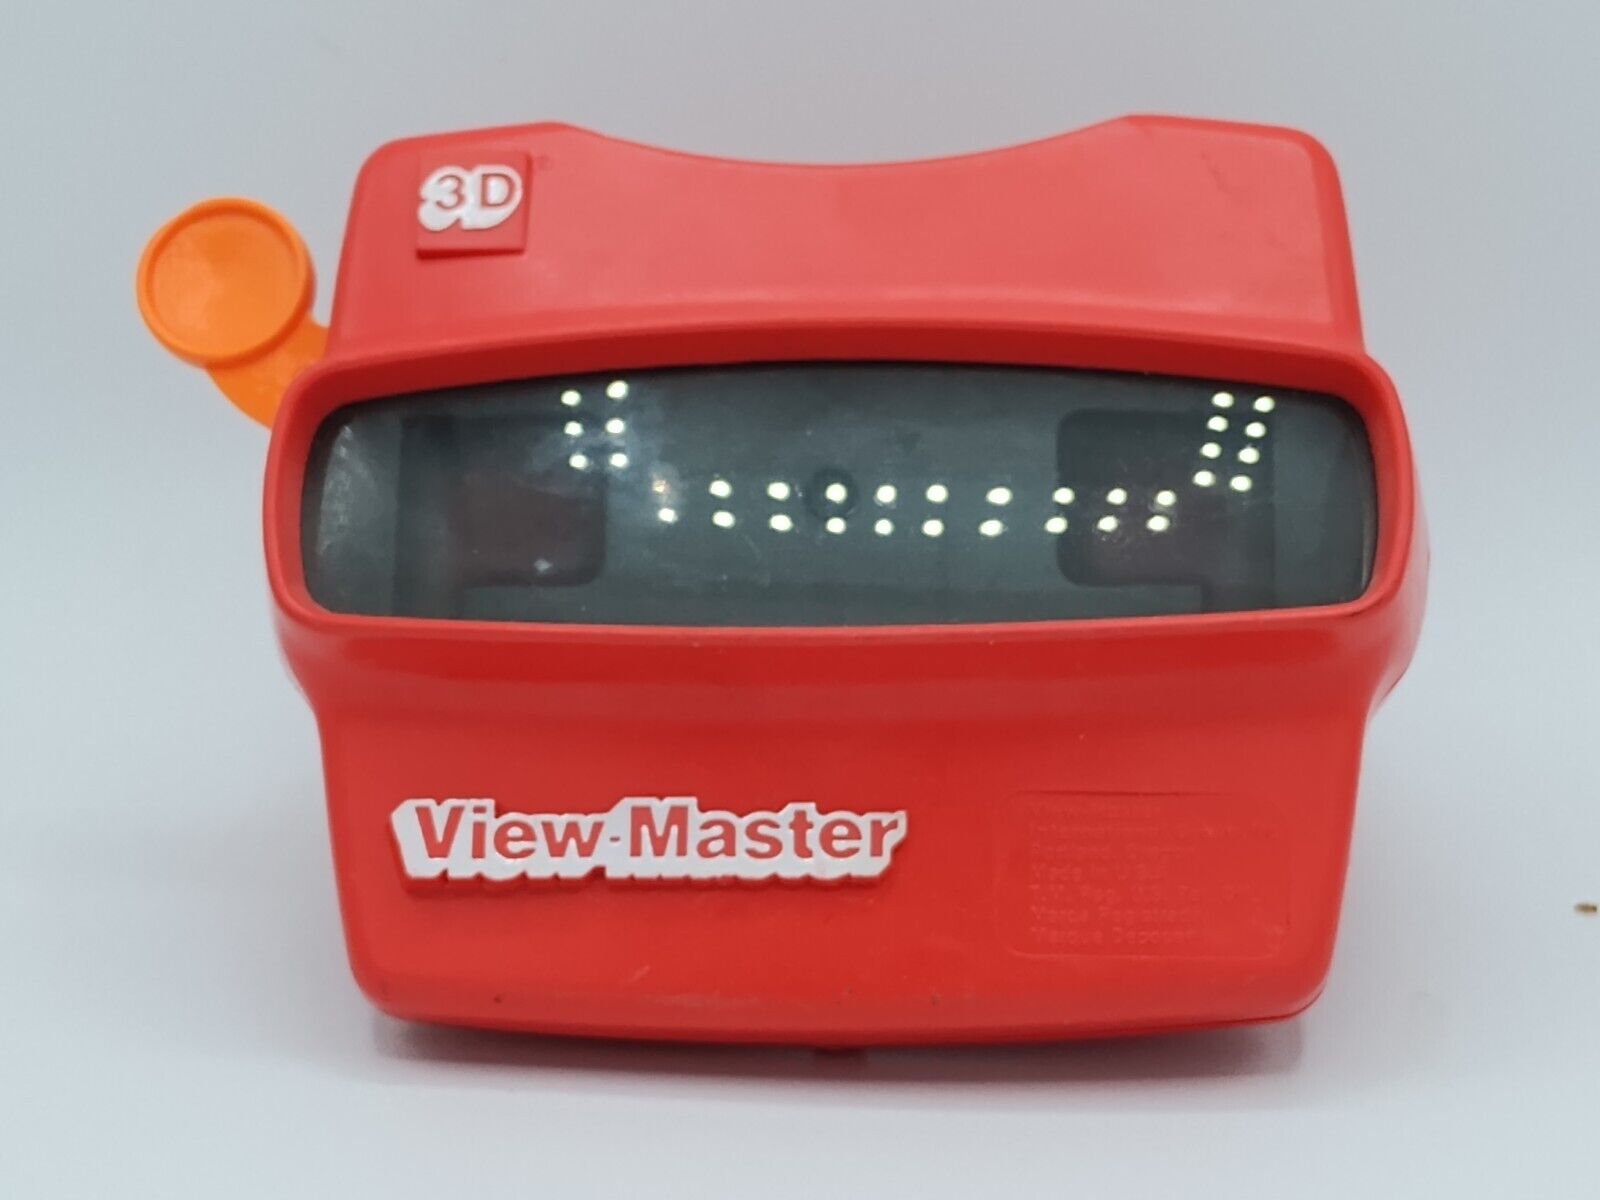 Vintage View Master 3D Viewer Red Classic Viewmaster Toy Slide Viewer USA GAF